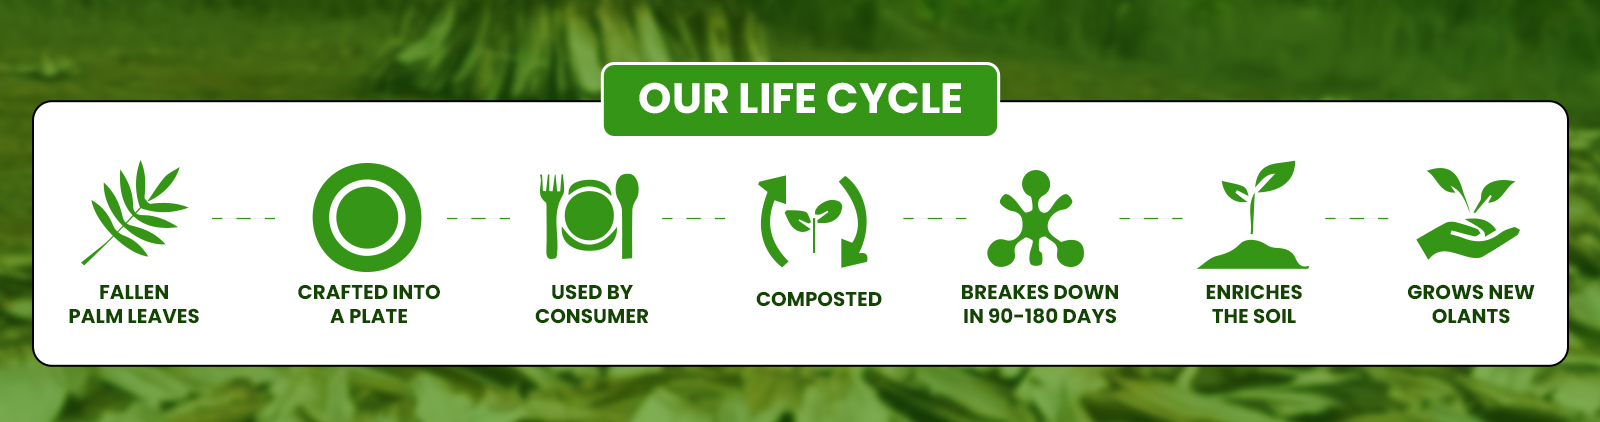 Our Life Cycle copy